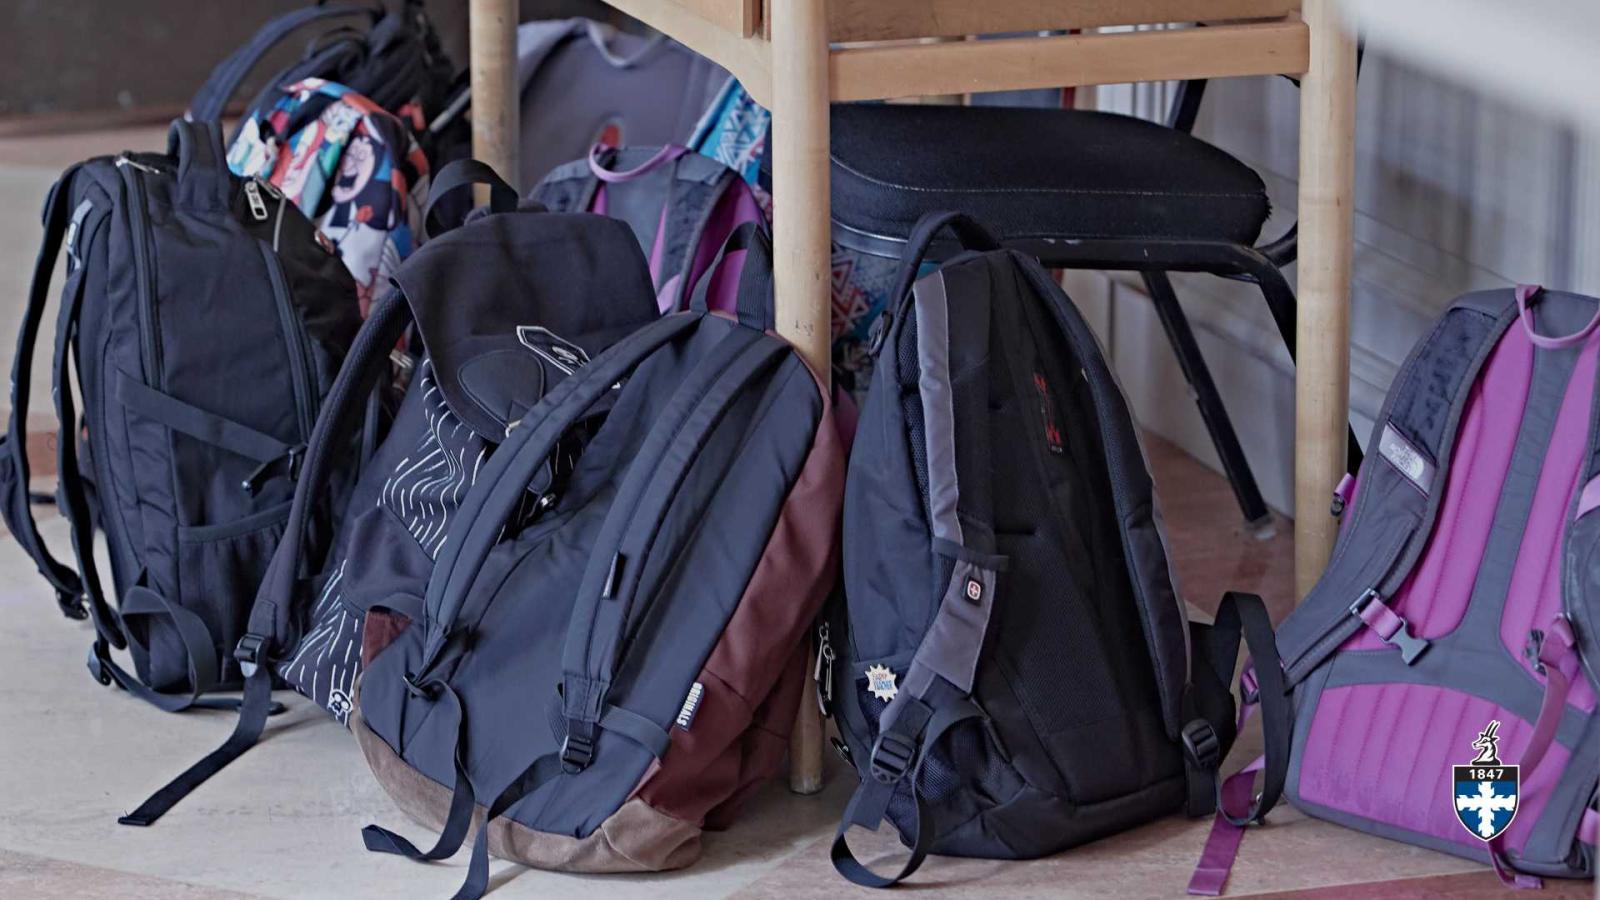 Seven backpacks lying near foot of dining table.